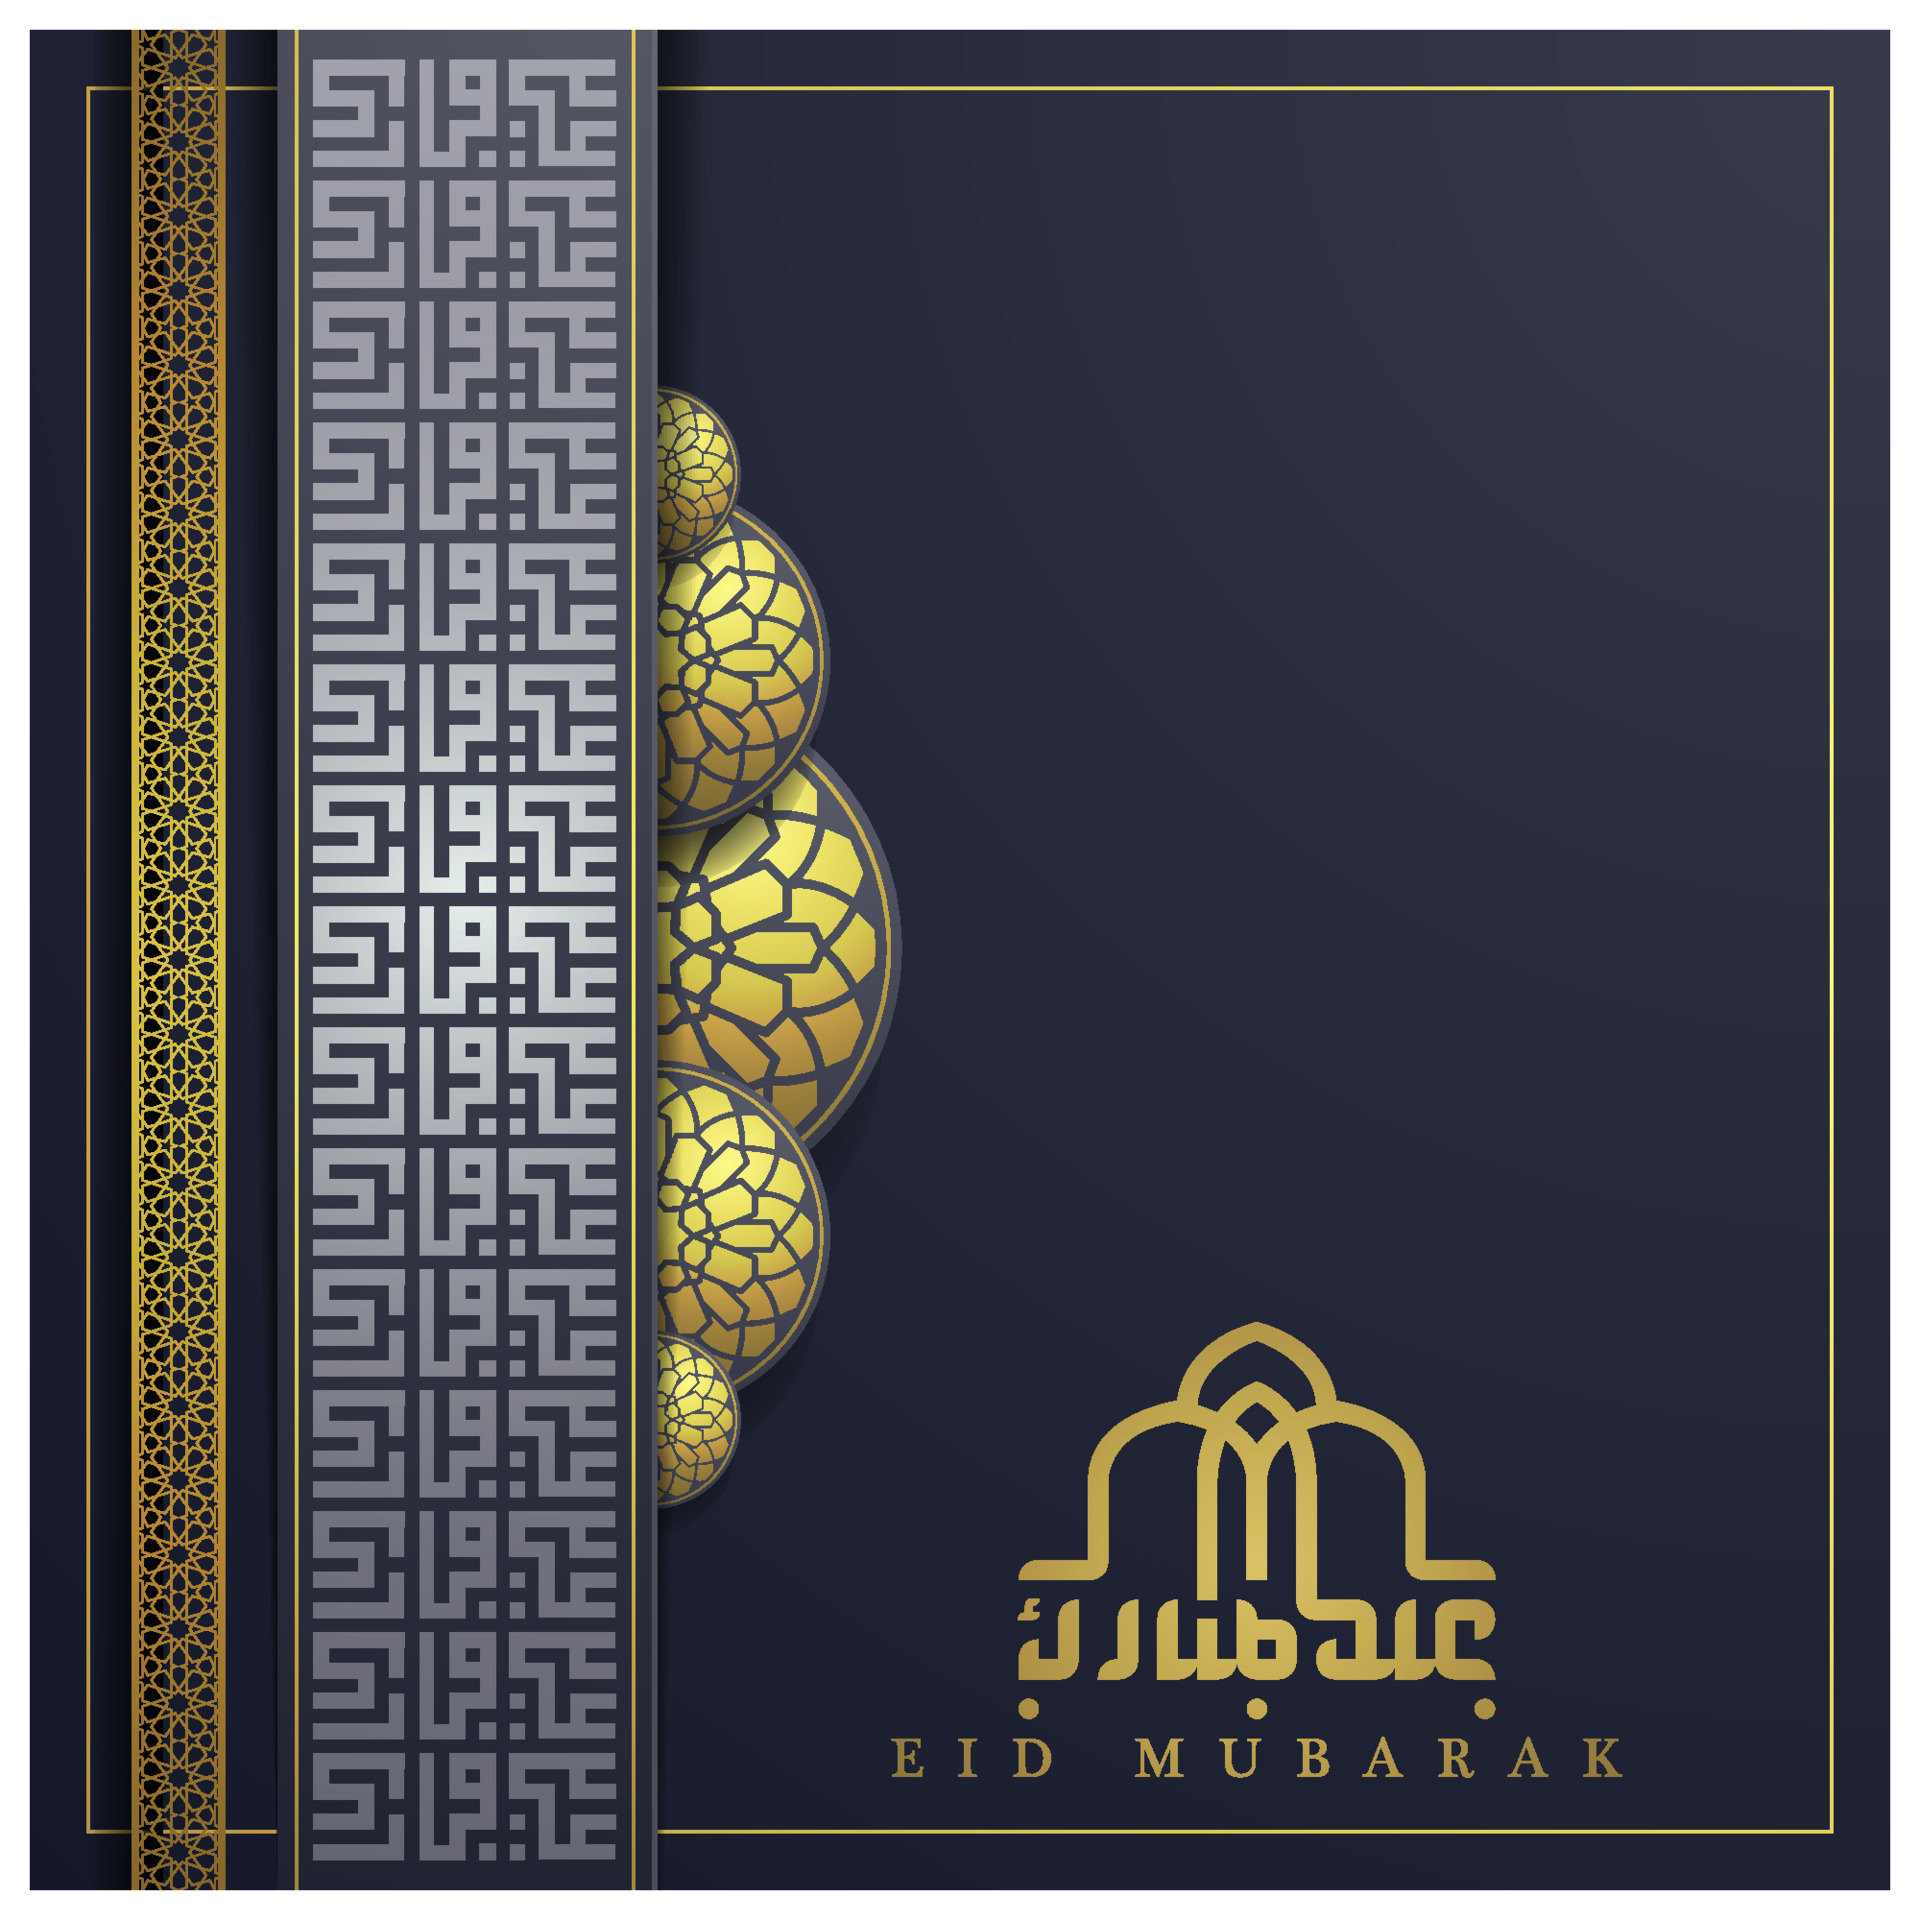 Eid Mubarak Greeting card morocco floral pattern vector design with ...